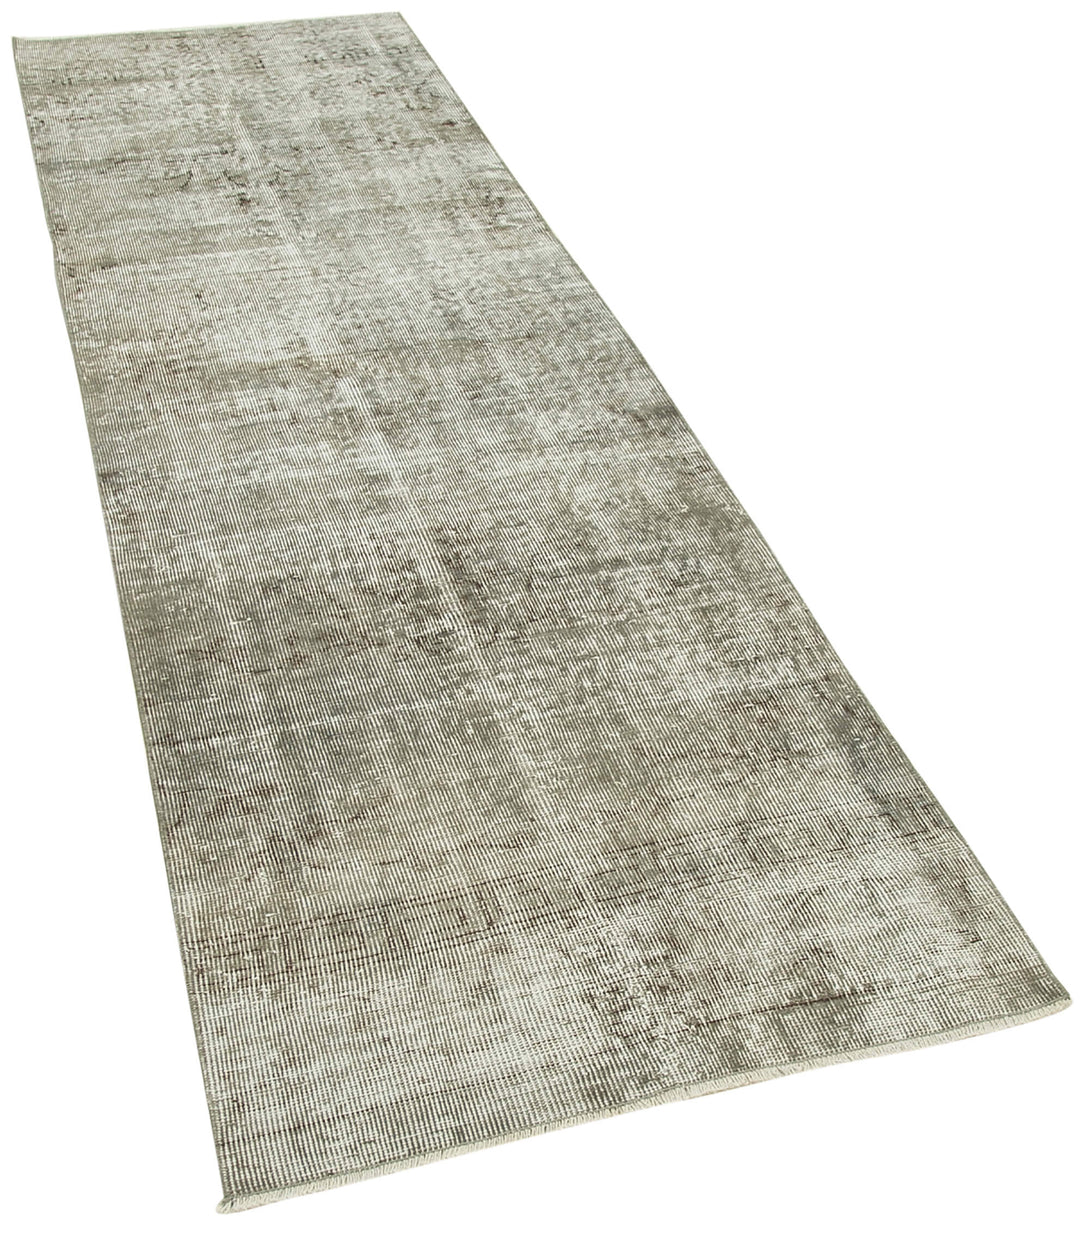 Handmade Overdyed Runner > Design# OL-AC-38166 > Size: 2'-7" x 9'-7", Carpet Culture Rugs, Handmade Rugs, NYC Rugs, New Rugs, Shop Rugs, Rug Store, Outlet Rugs, SoHo Rugs, Rugs in USA